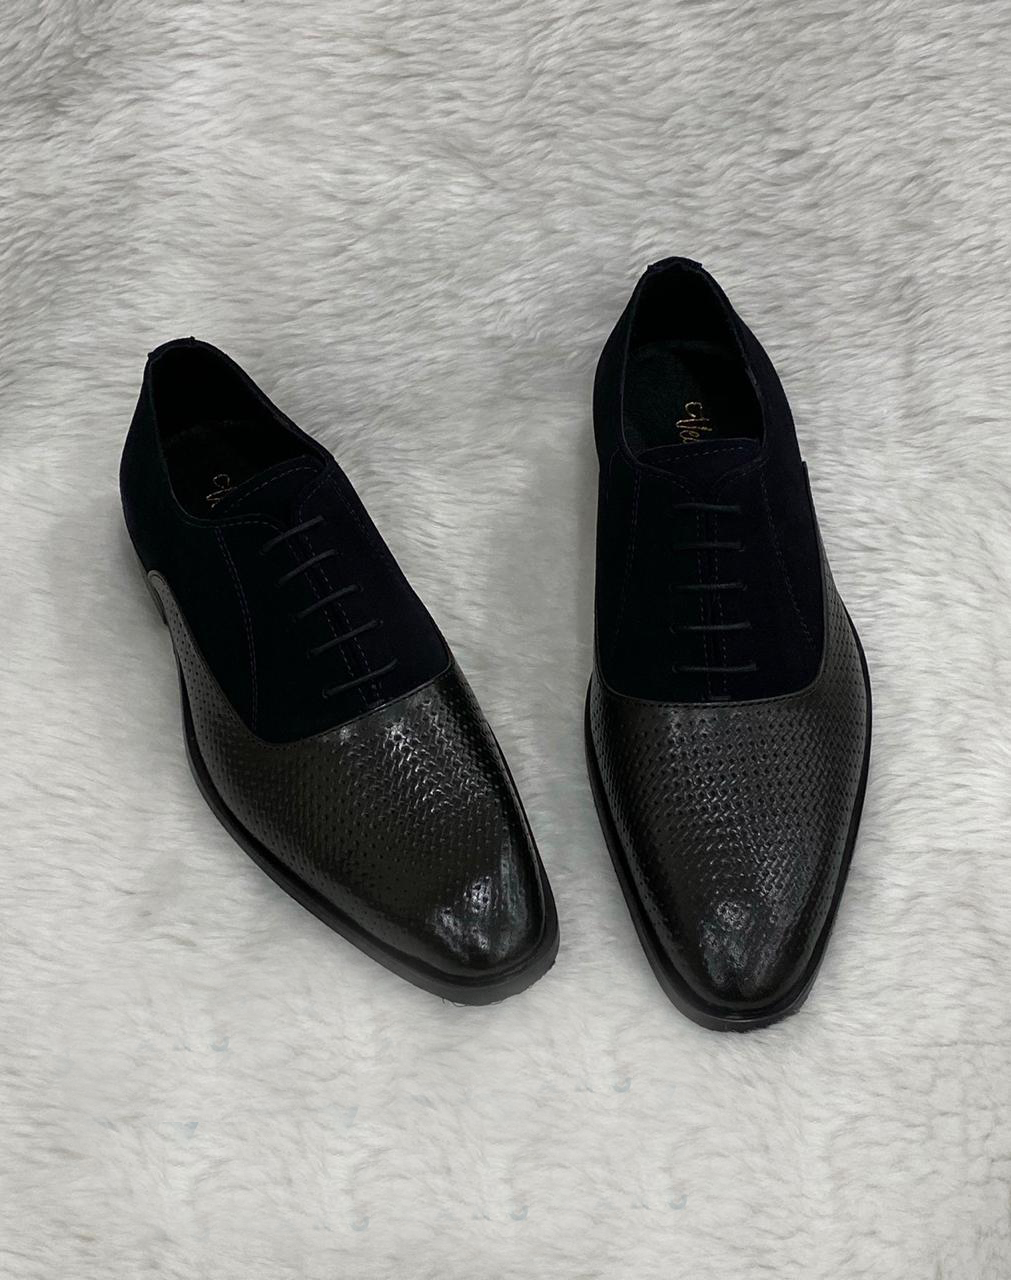 Premium Quality Leather Formal Shoes For Men-Unique and Classy